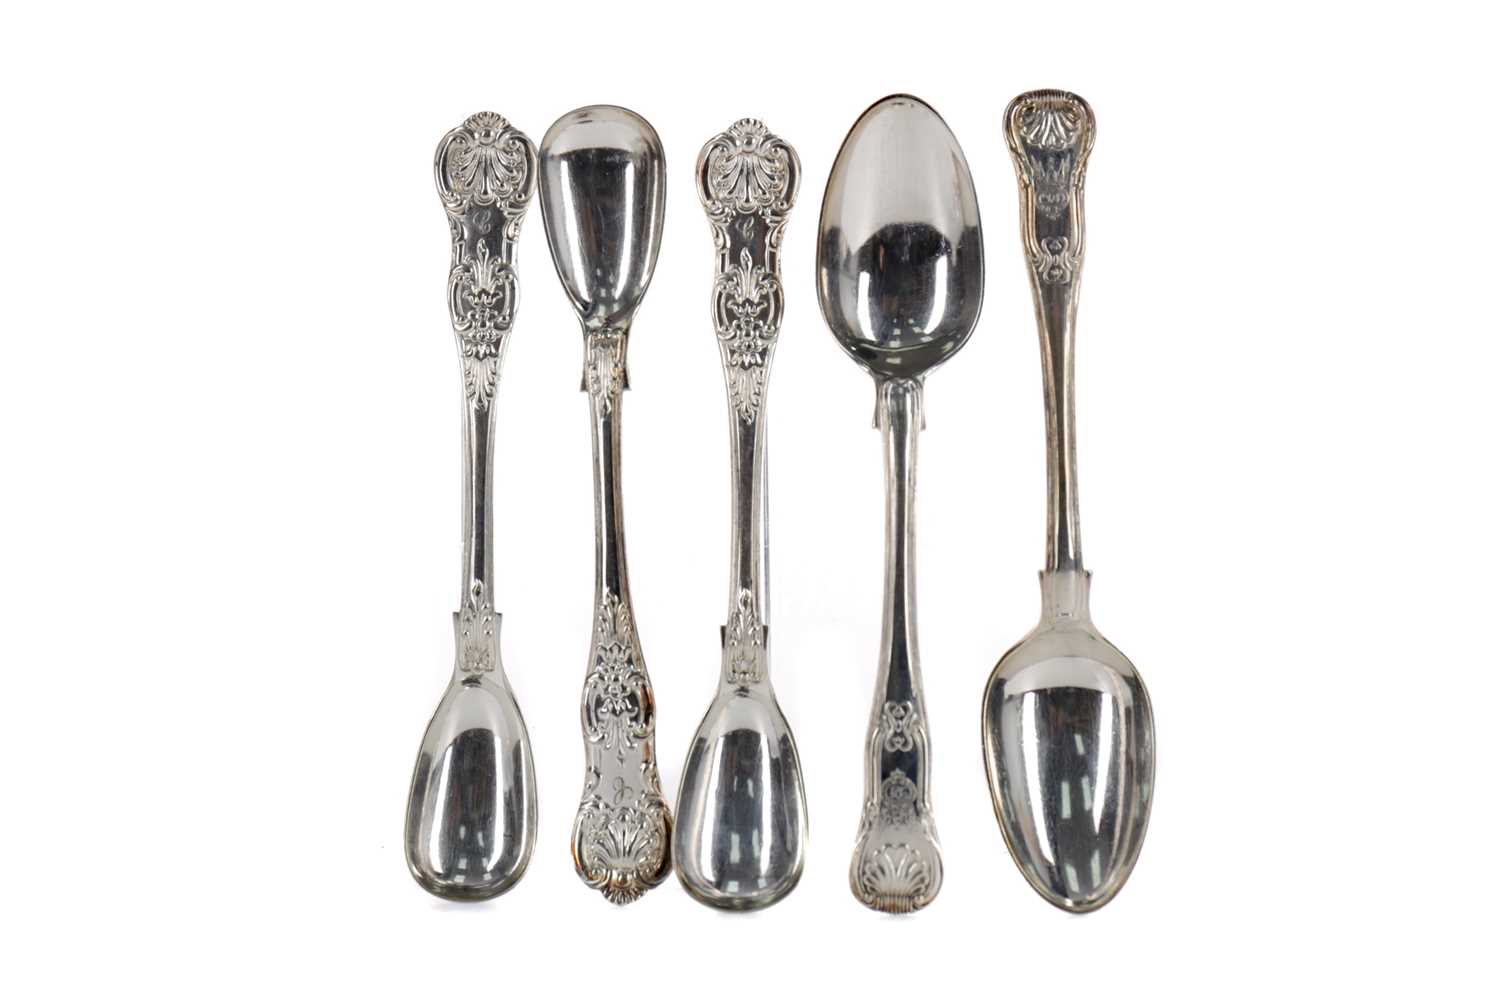 Lot 486 - AMENDMENT -  SET OF EIGHT GEORGE IV SILVER TEASPOONS, ALONG WITH PLATED PRESERVE SPOONS